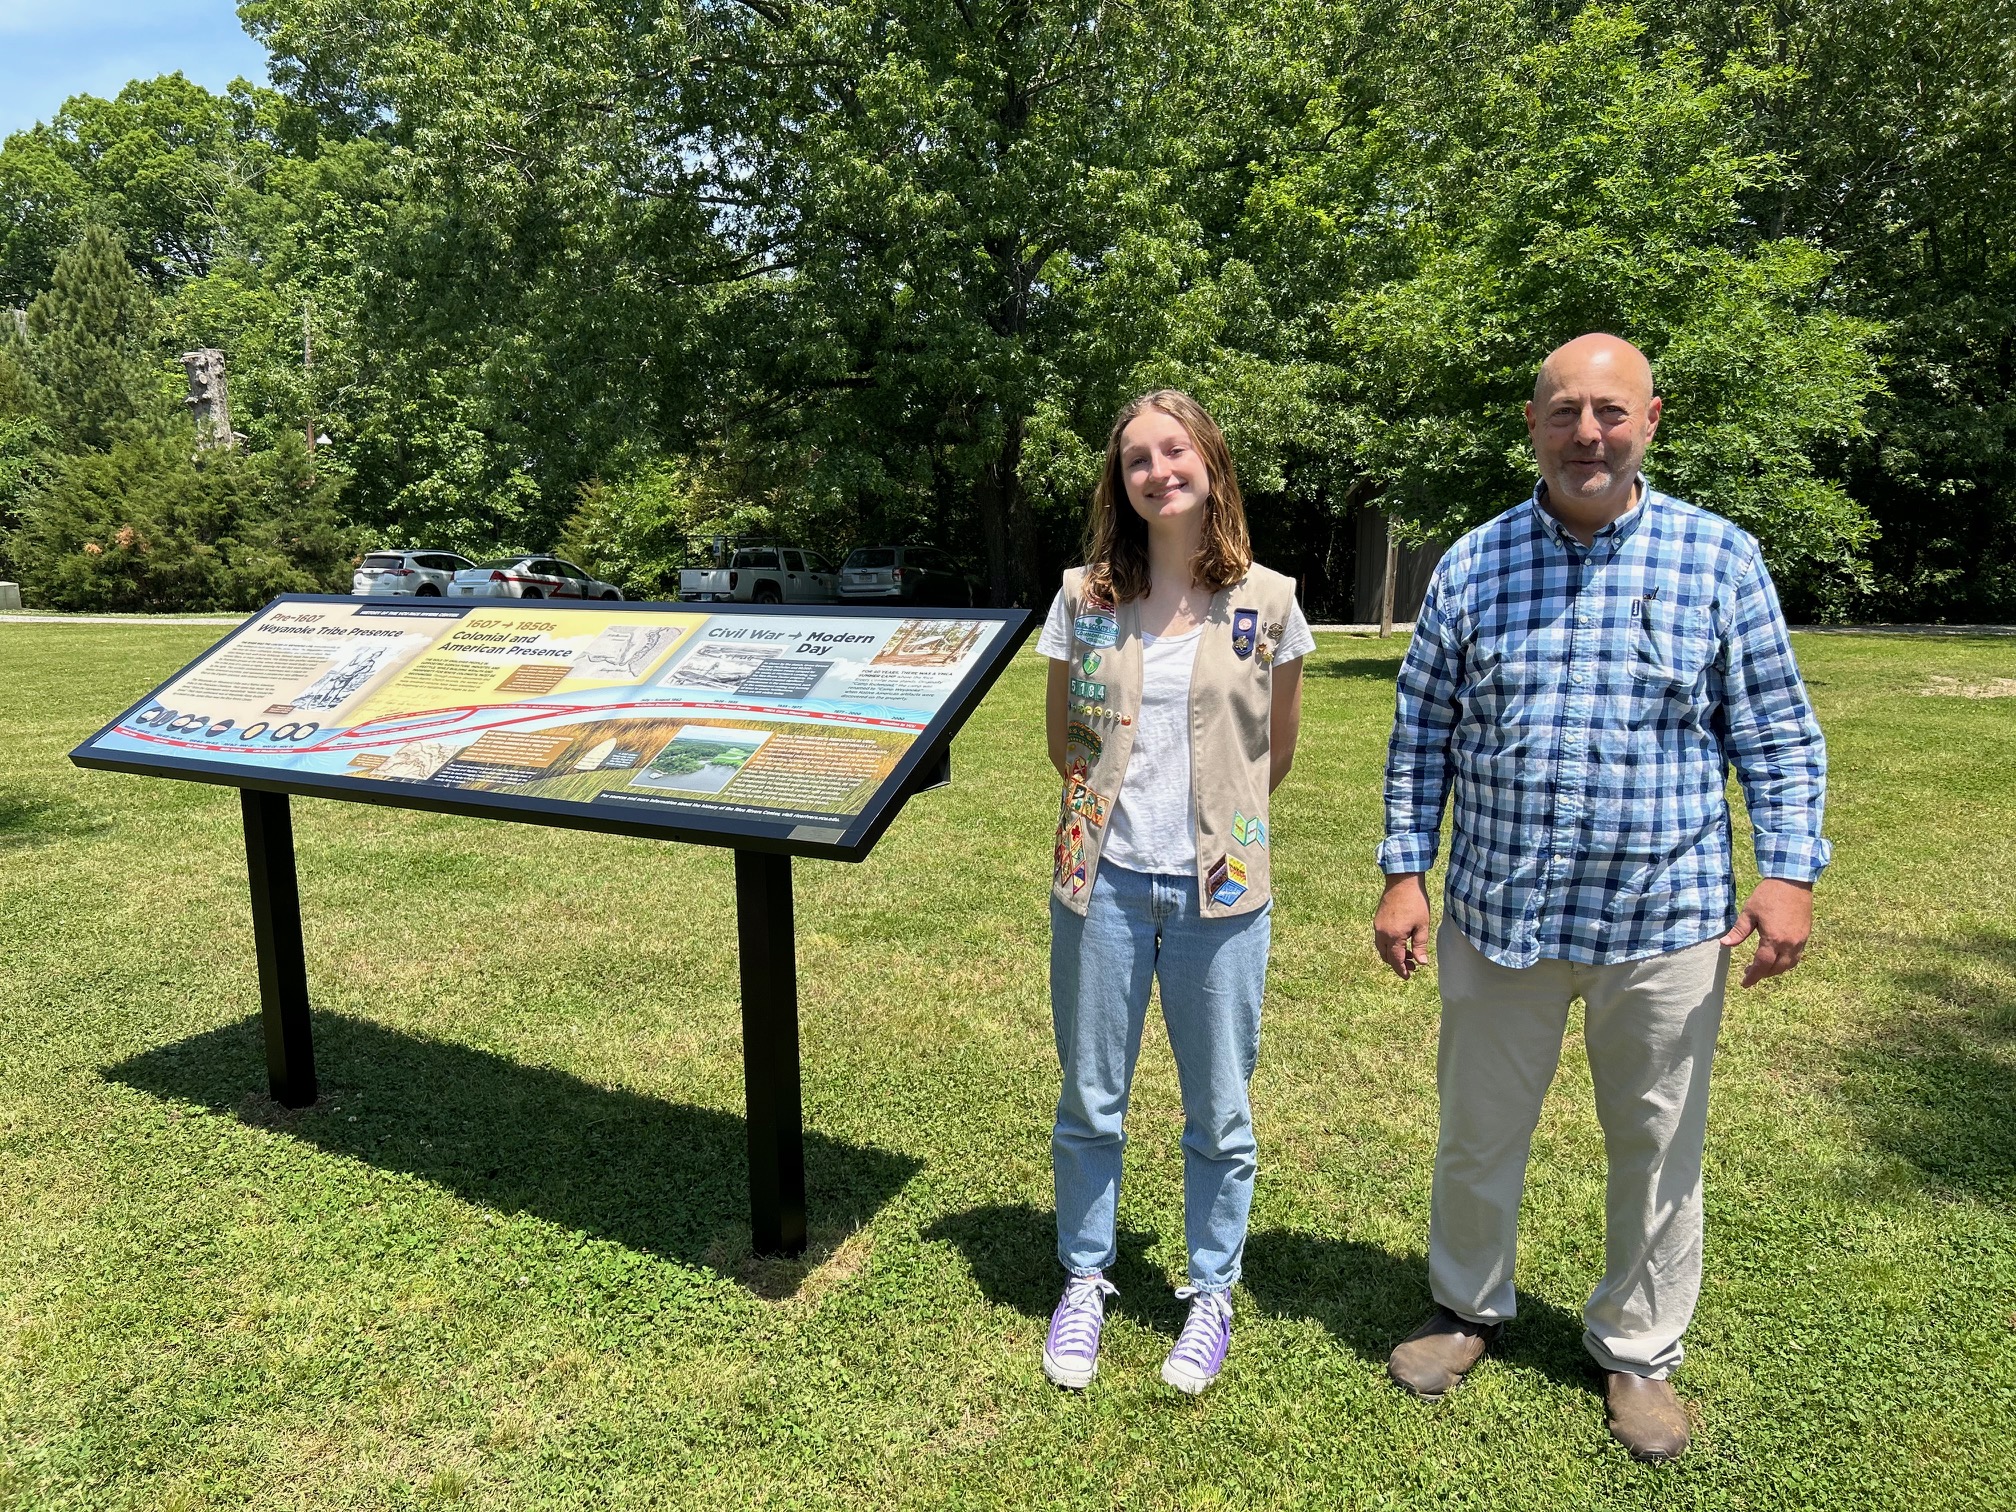 Dr. Greg Garman stands next to Amelia V. Johnson, who researched the history of the Rice River Center's land and designed the educational sign pictured.